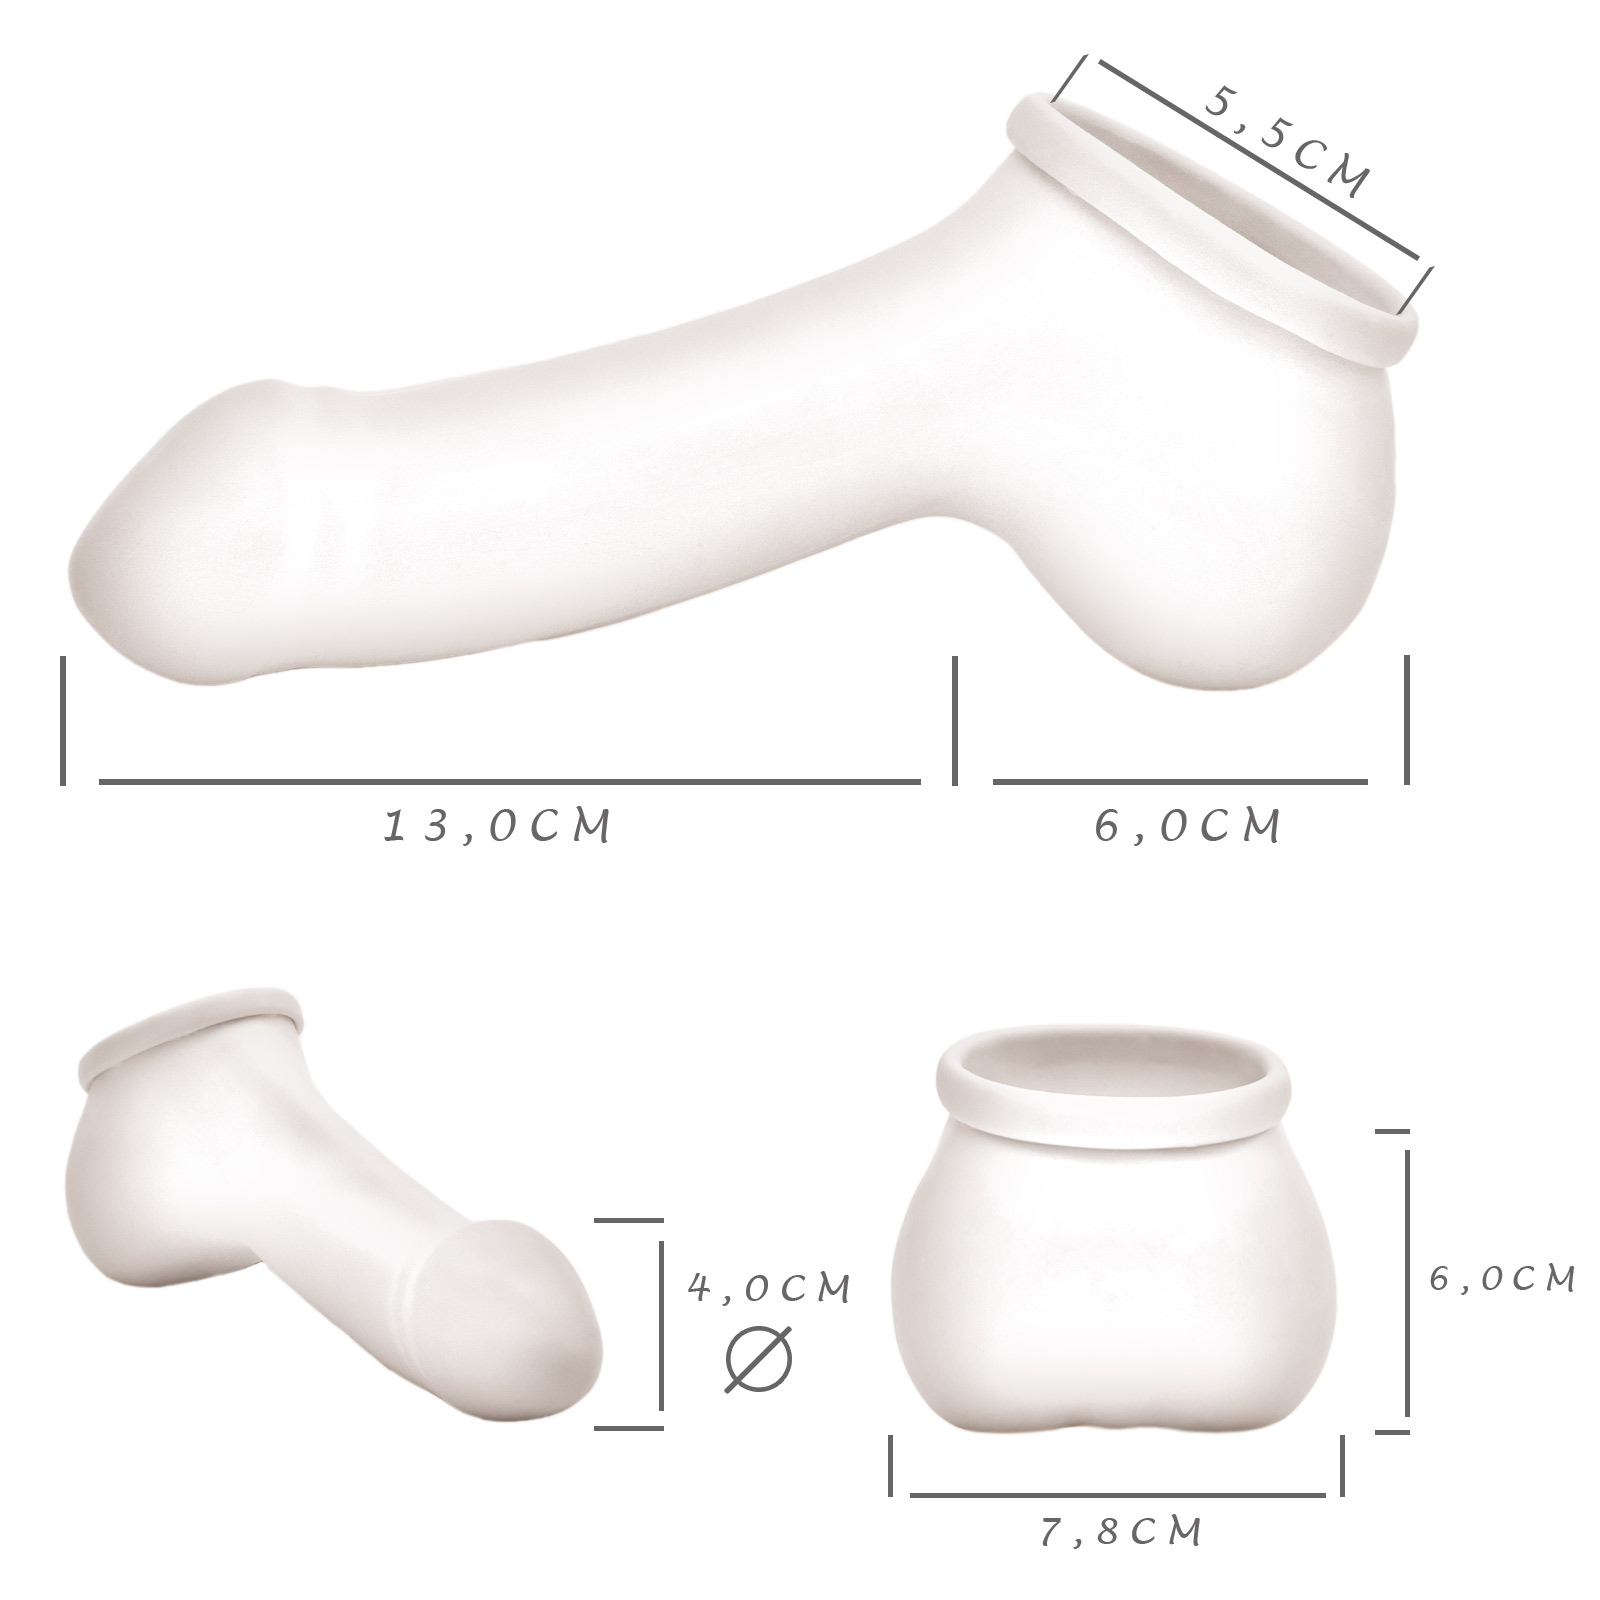 Toylie Latex Penis Sleeve «ADAM 5.5» semi-transparent, with molded glans and scrotum - suitable for vegans